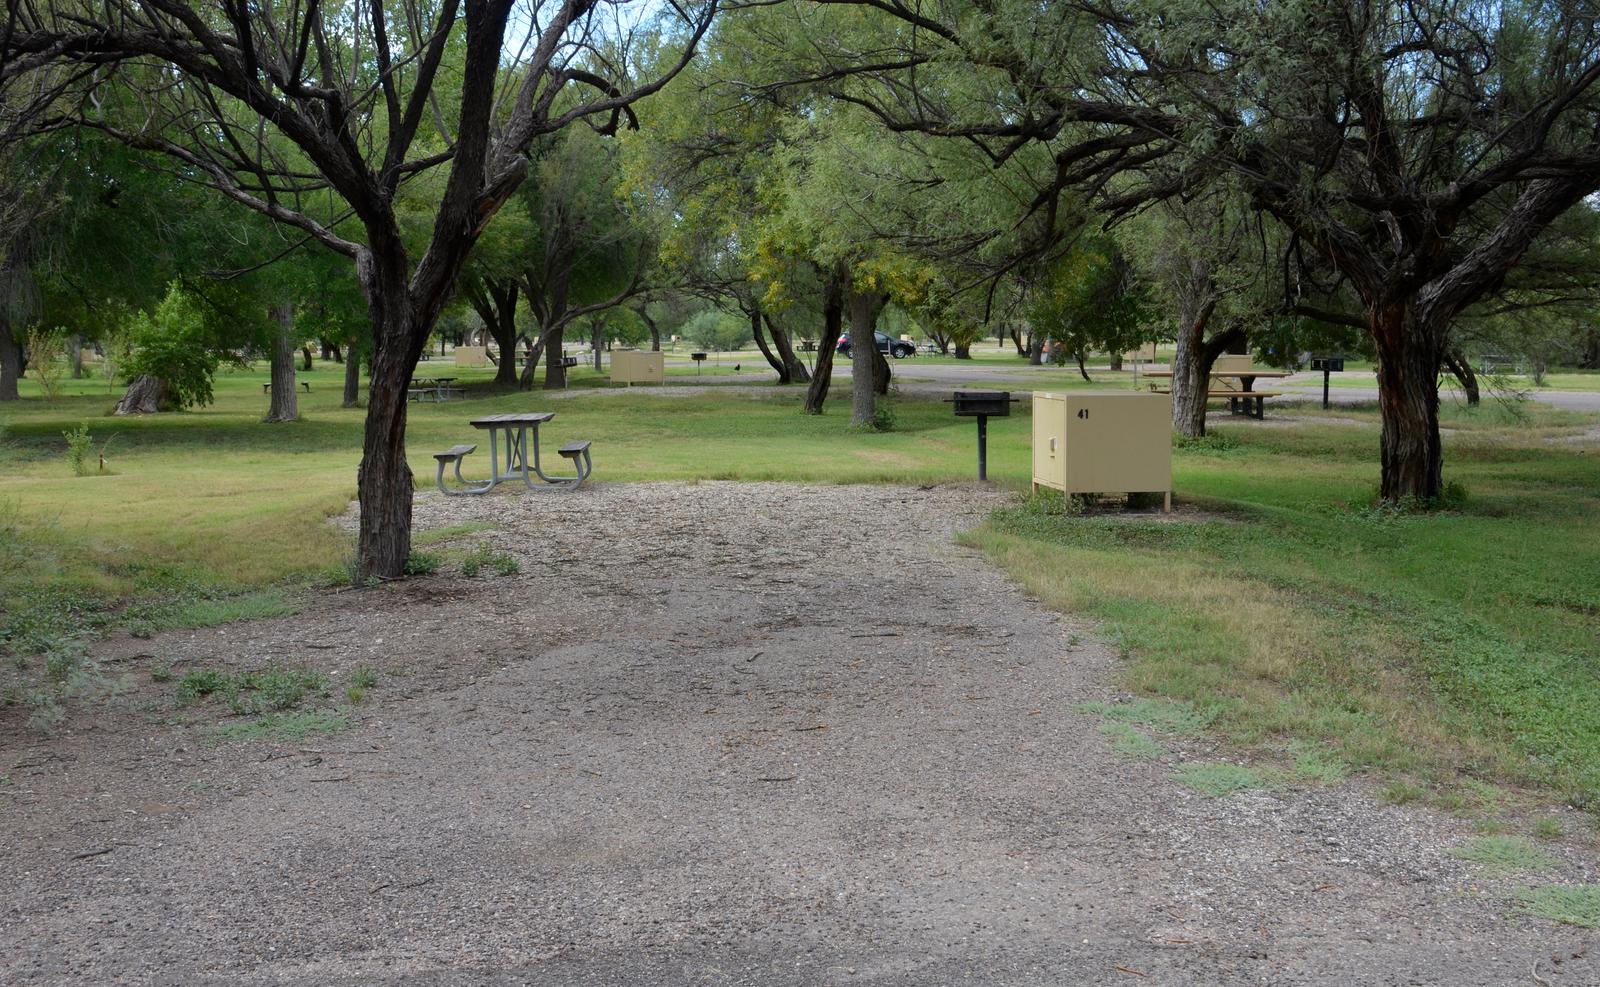 View of the driveway and main site area from the road. The gravel driveway leads into the site, with a picnic table on one side, and a metal grill and bear box on the other. There is a large field with trees growing just behind the site, where there is plenty of space to pitch a tent or shelter. There is no shade or shelter provided in this site.View of the driveway and main site area